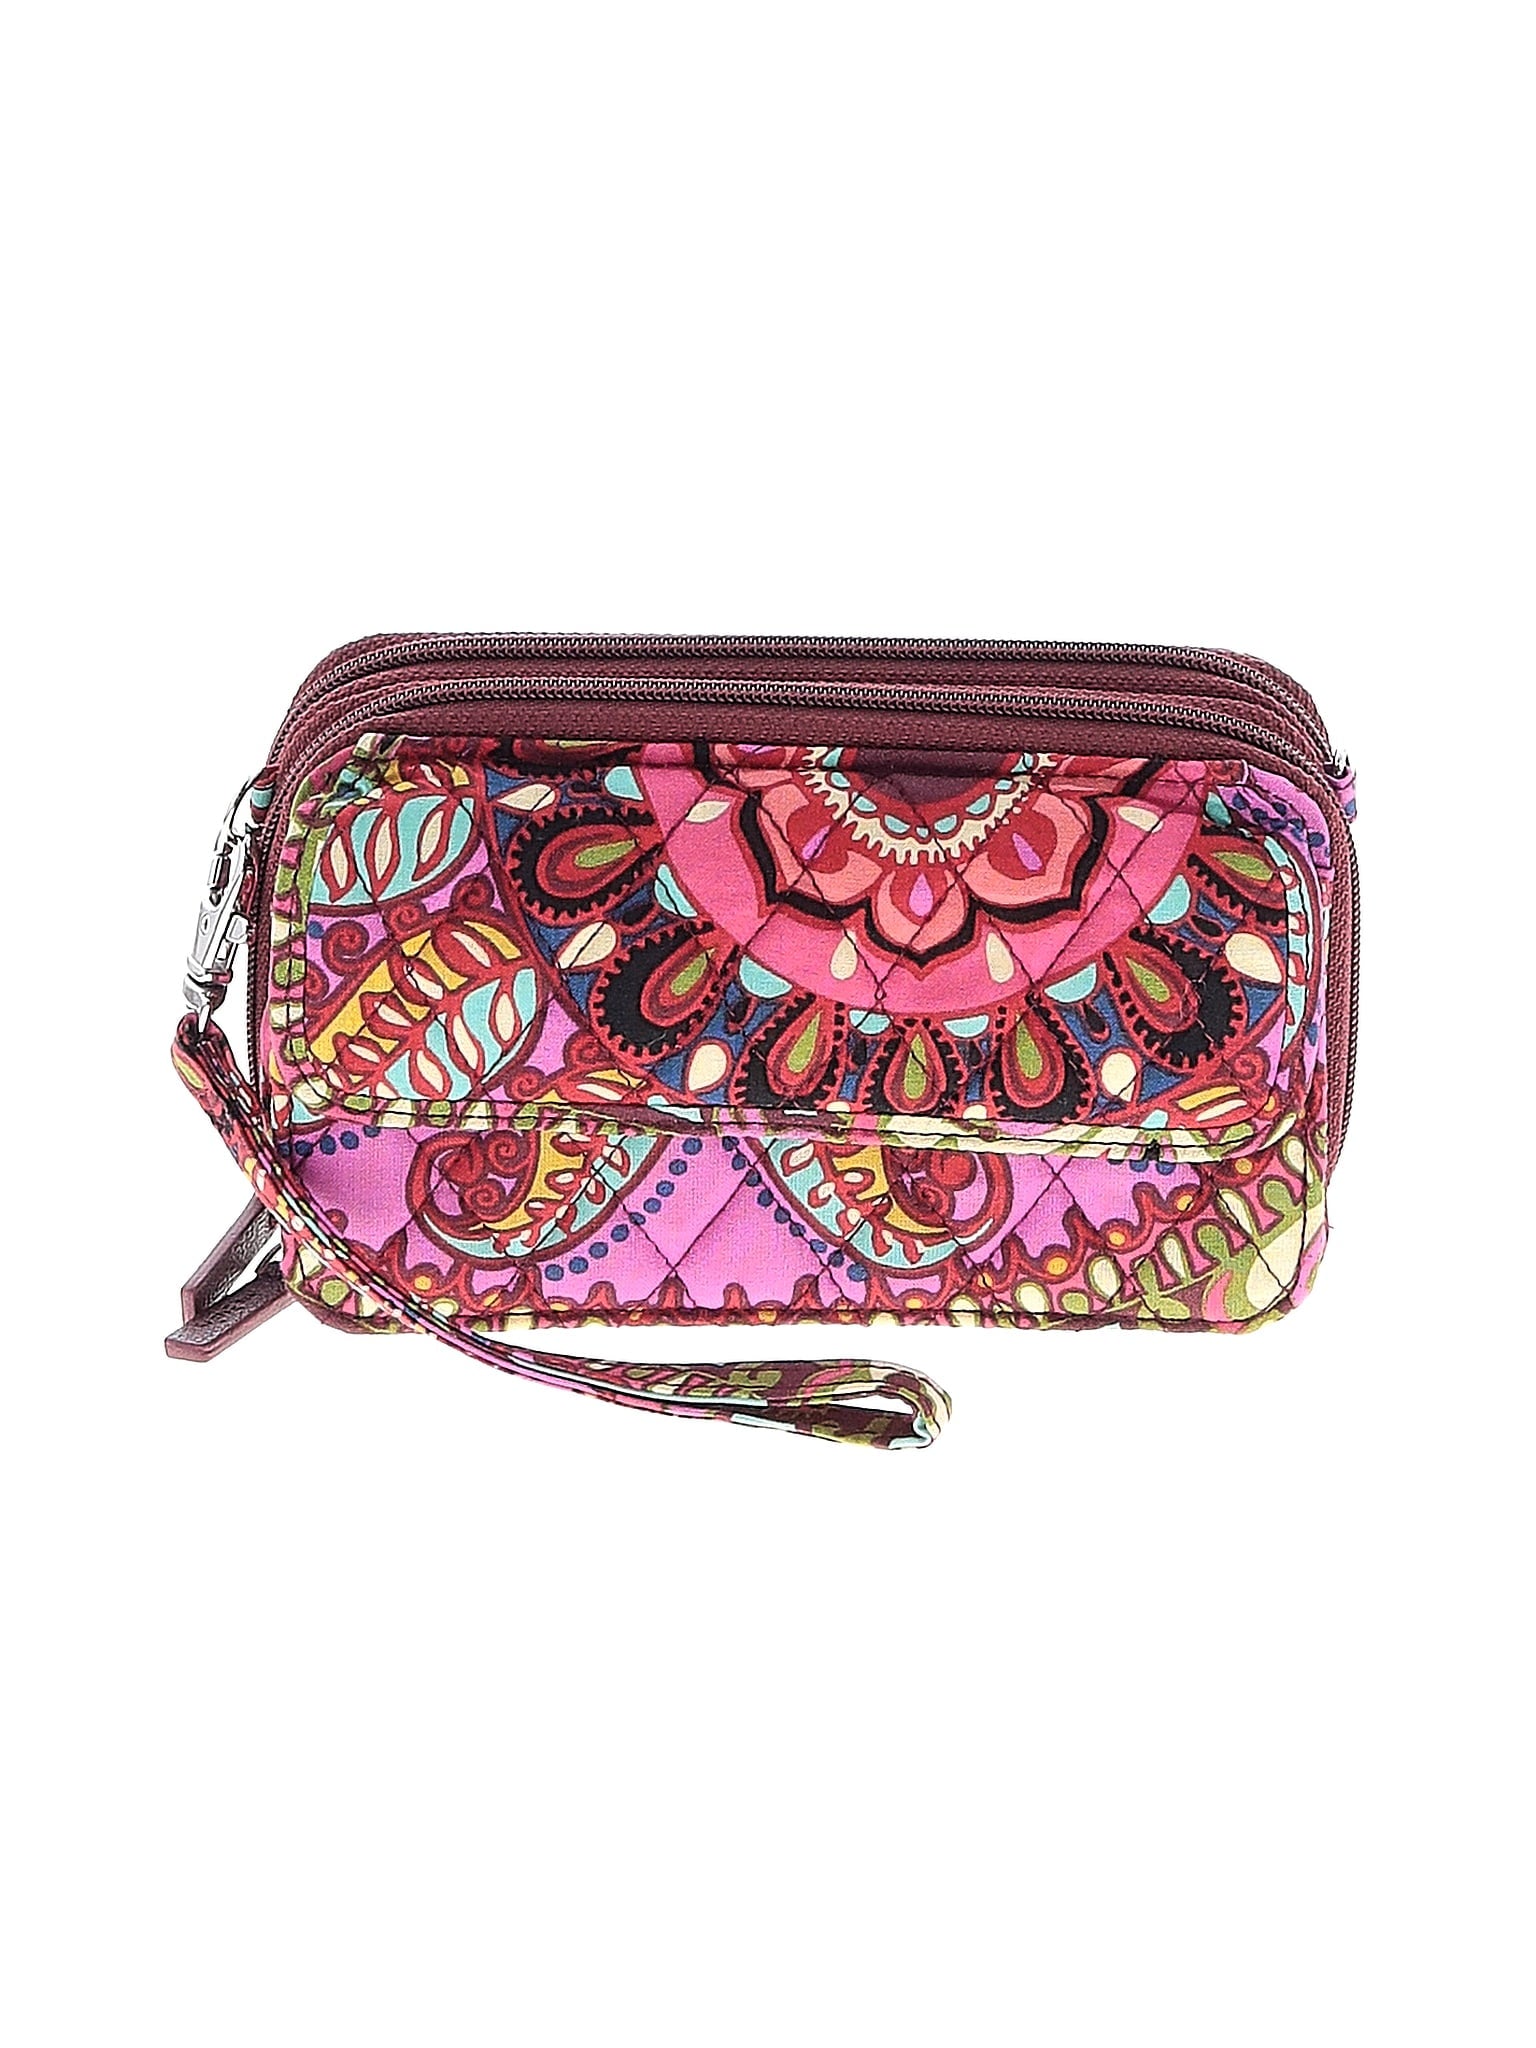 Resort Medallion All in One Crossbody for iPhone 6 size - One Size